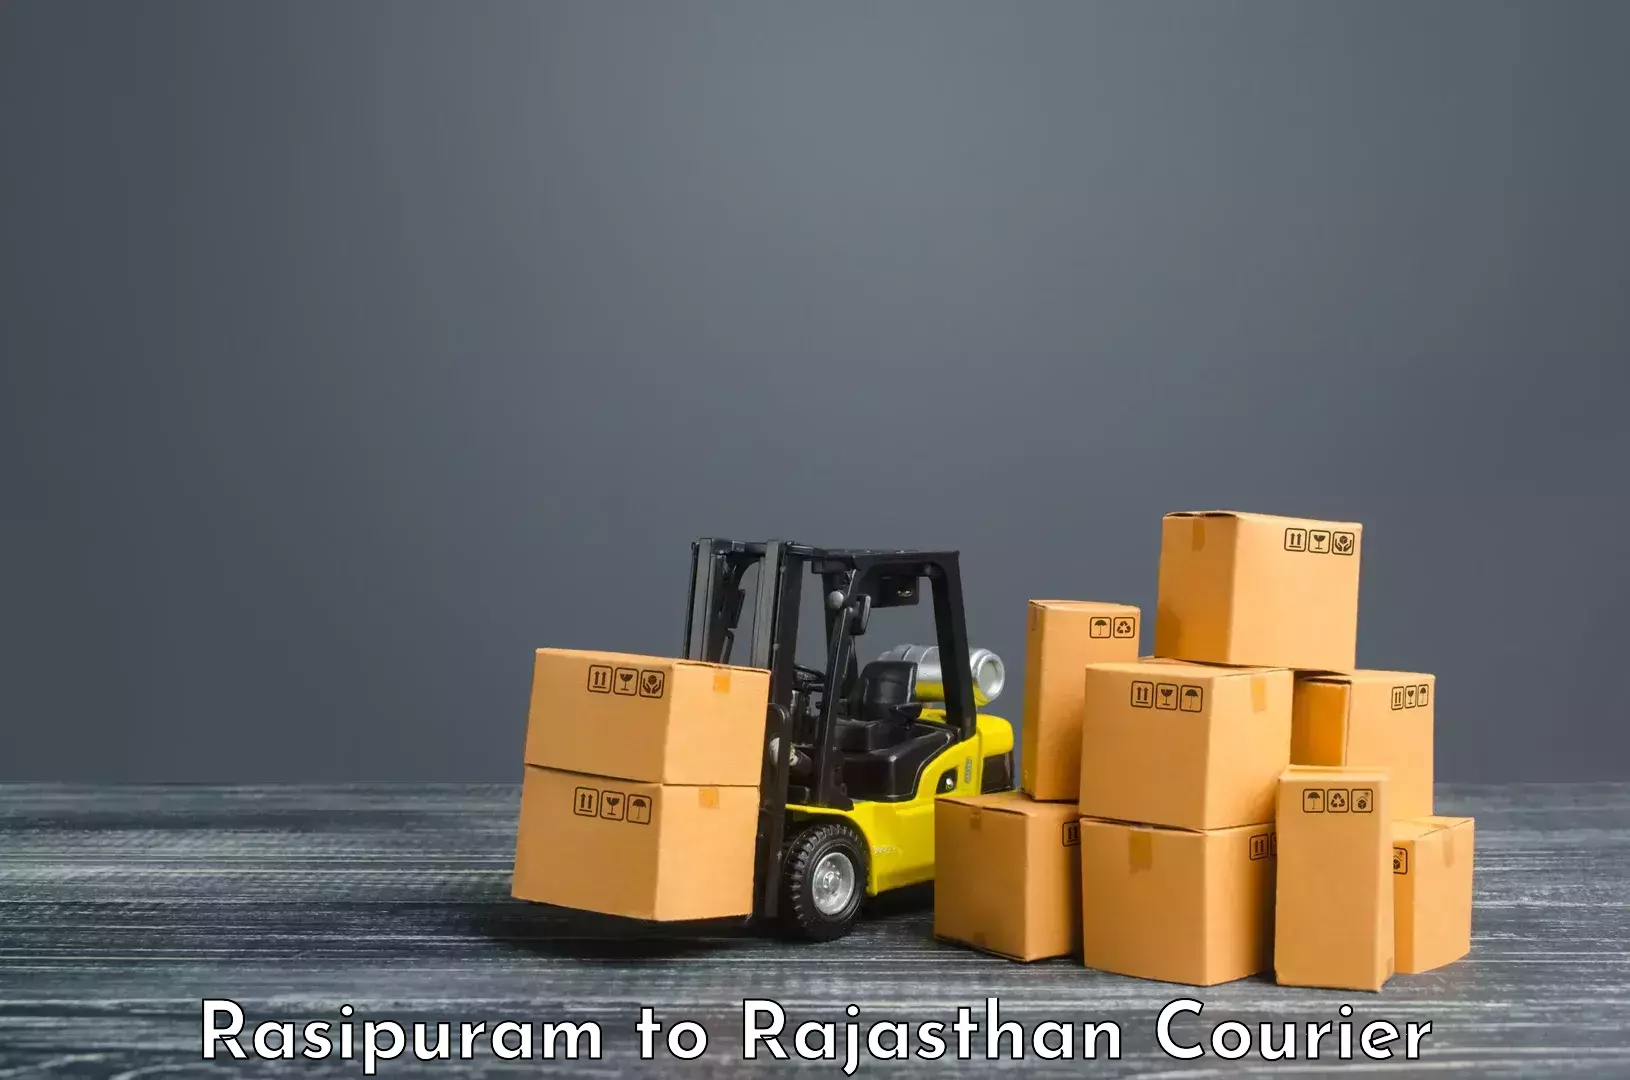 Sustainable delivery practices Rasipuram to Chittorgarh